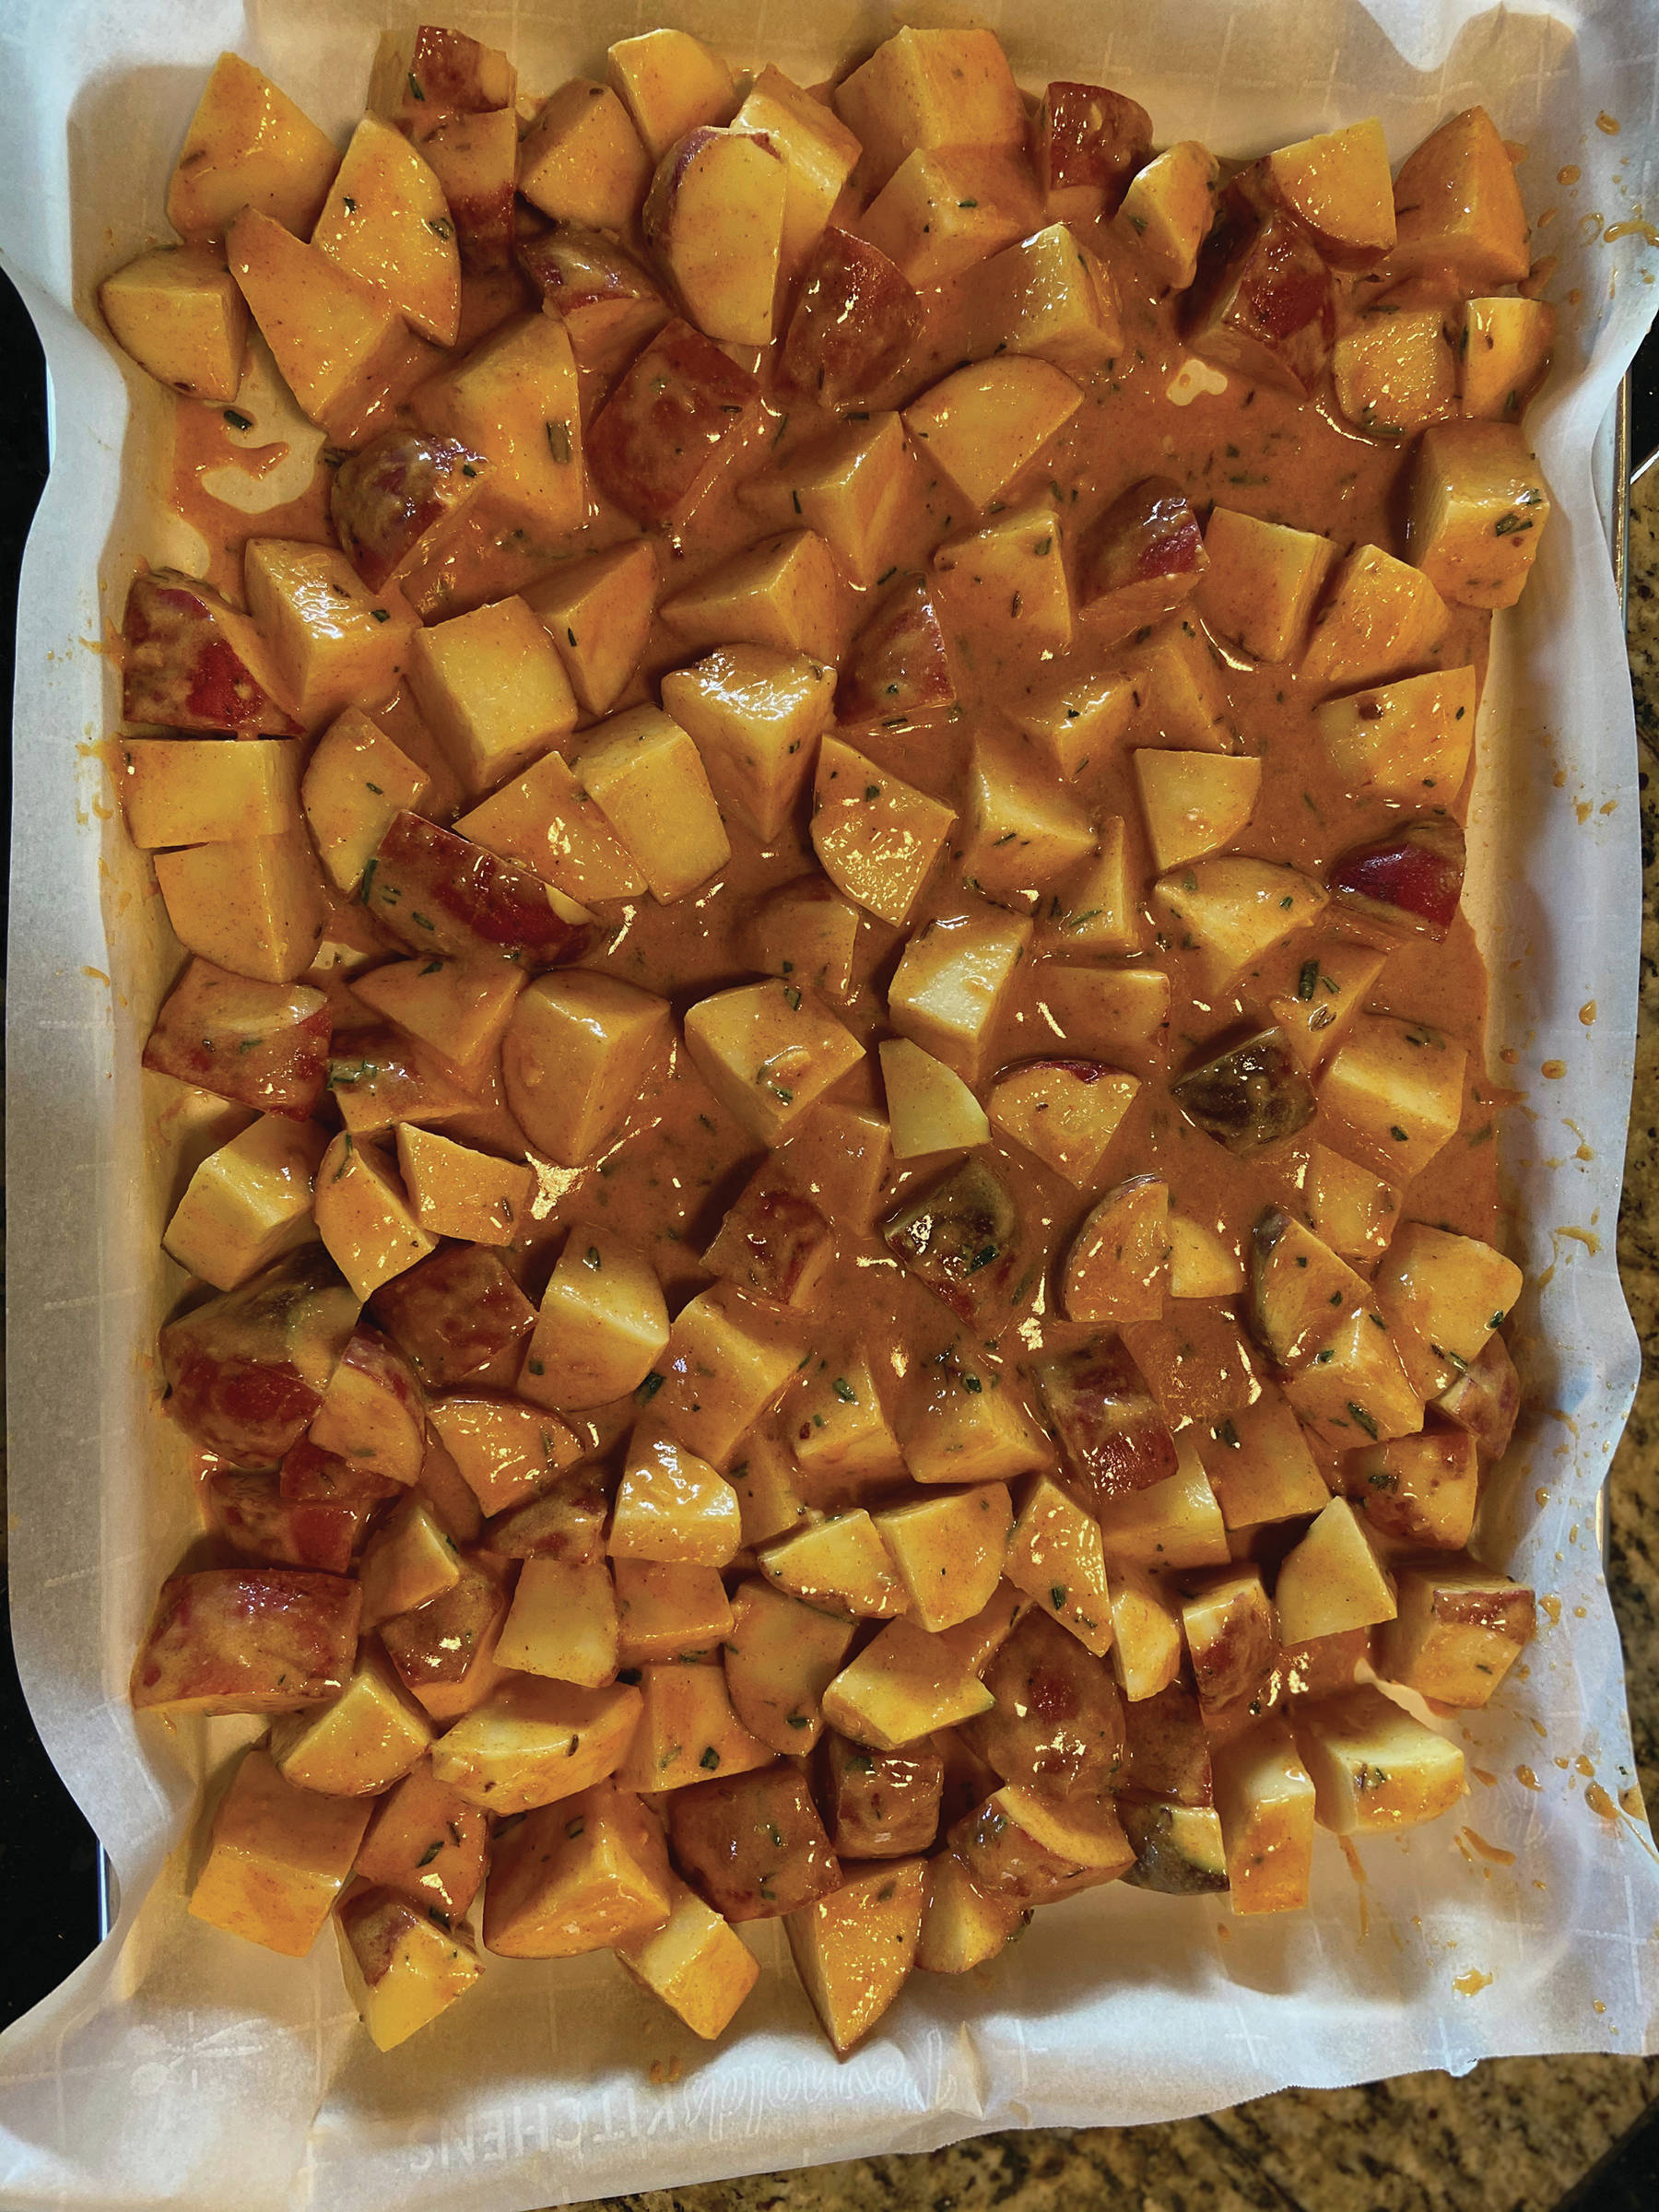 Teri Robl’s spicy potatoes are ready to go into the oven on April 25, 2020, in her Homer, Alaska kitchen. (Photo by Teri Robl)